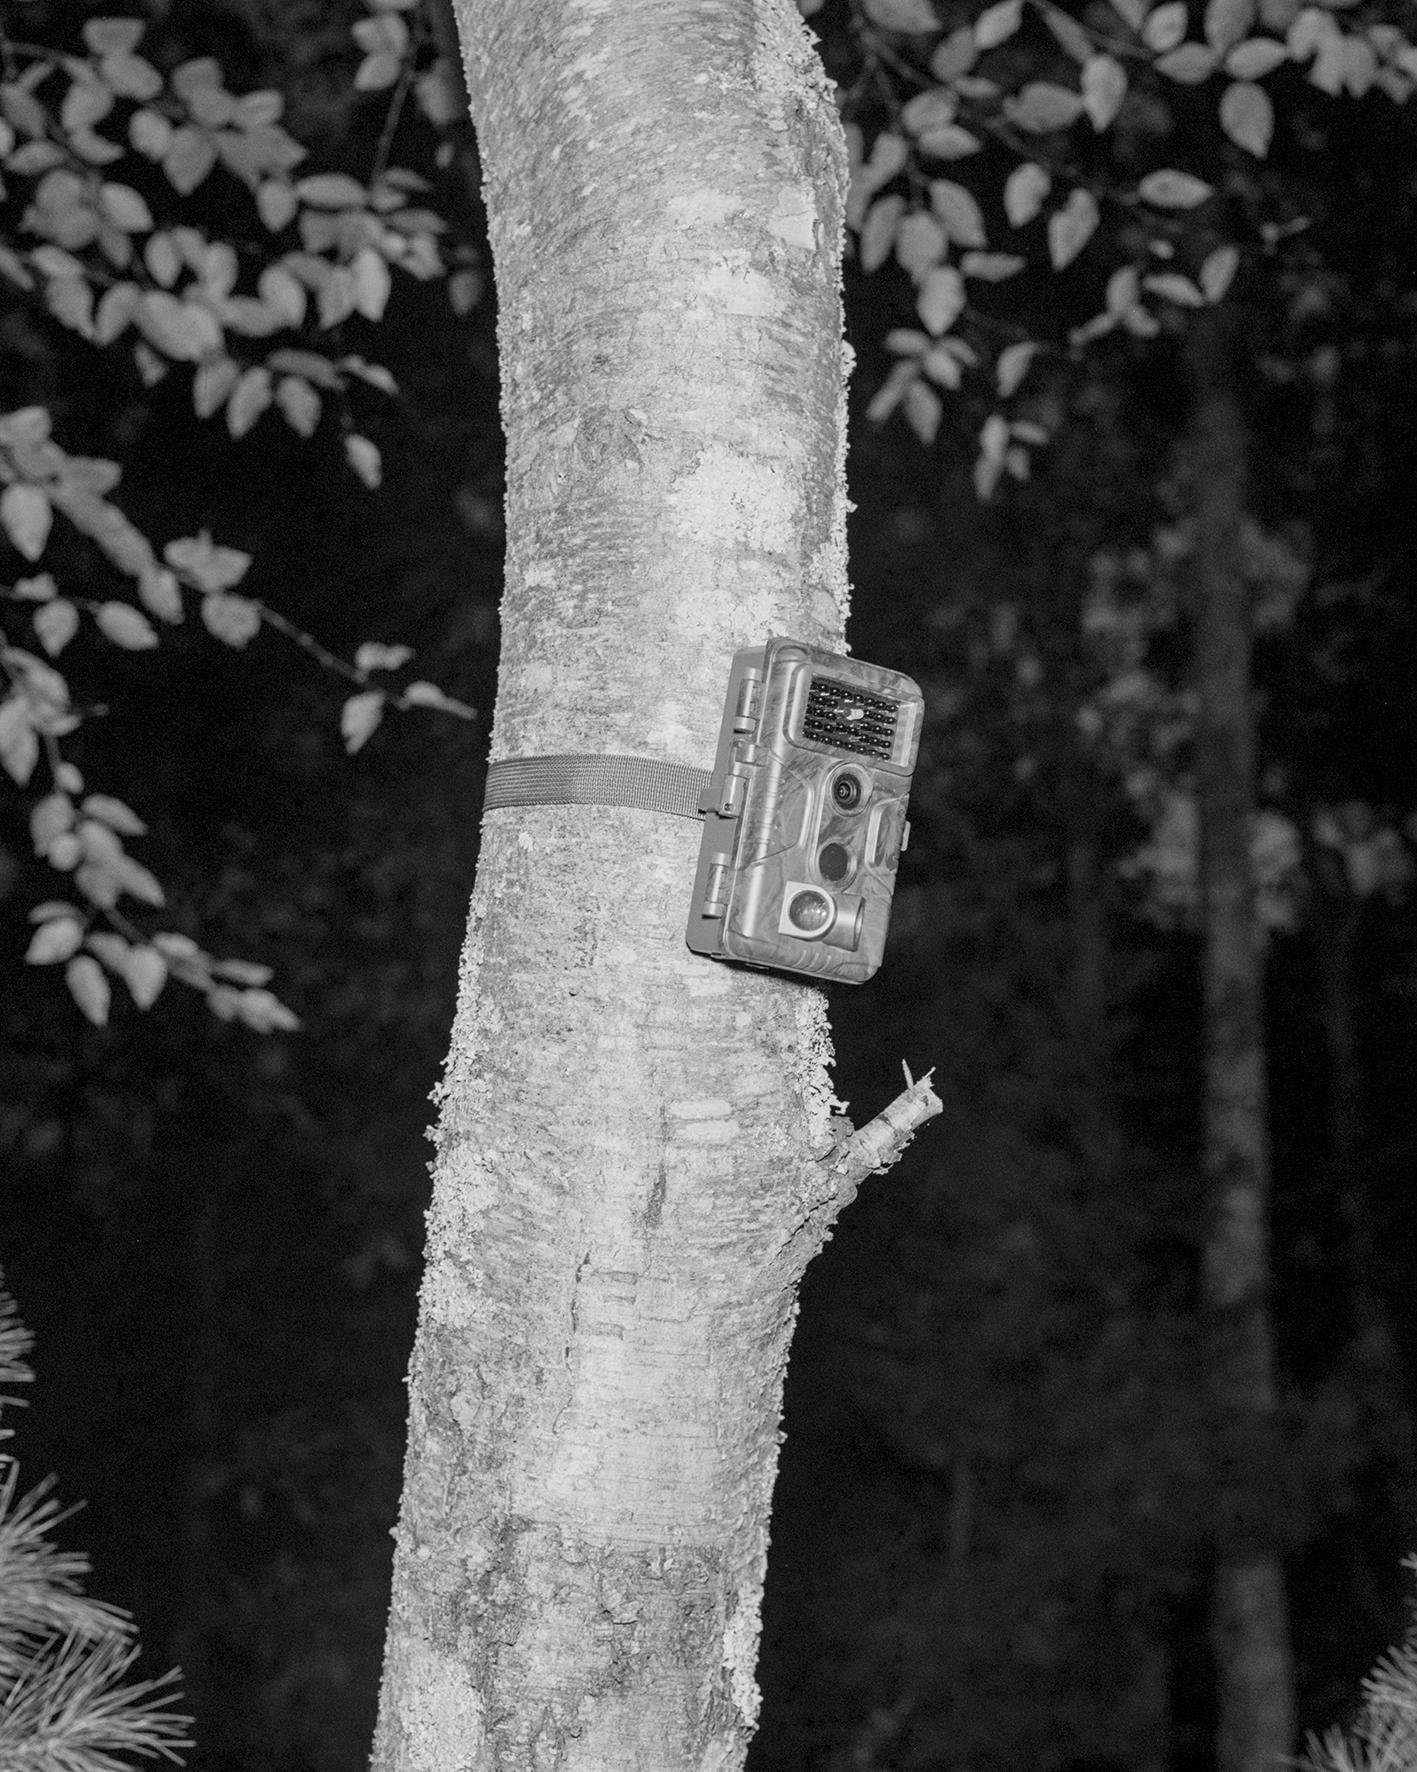 black and white photograph taken at night using flash. A trail camera is pictured in the middle of the frame, strapped to the trunk of a tree. Dark bushed and trees are just visible in the background.